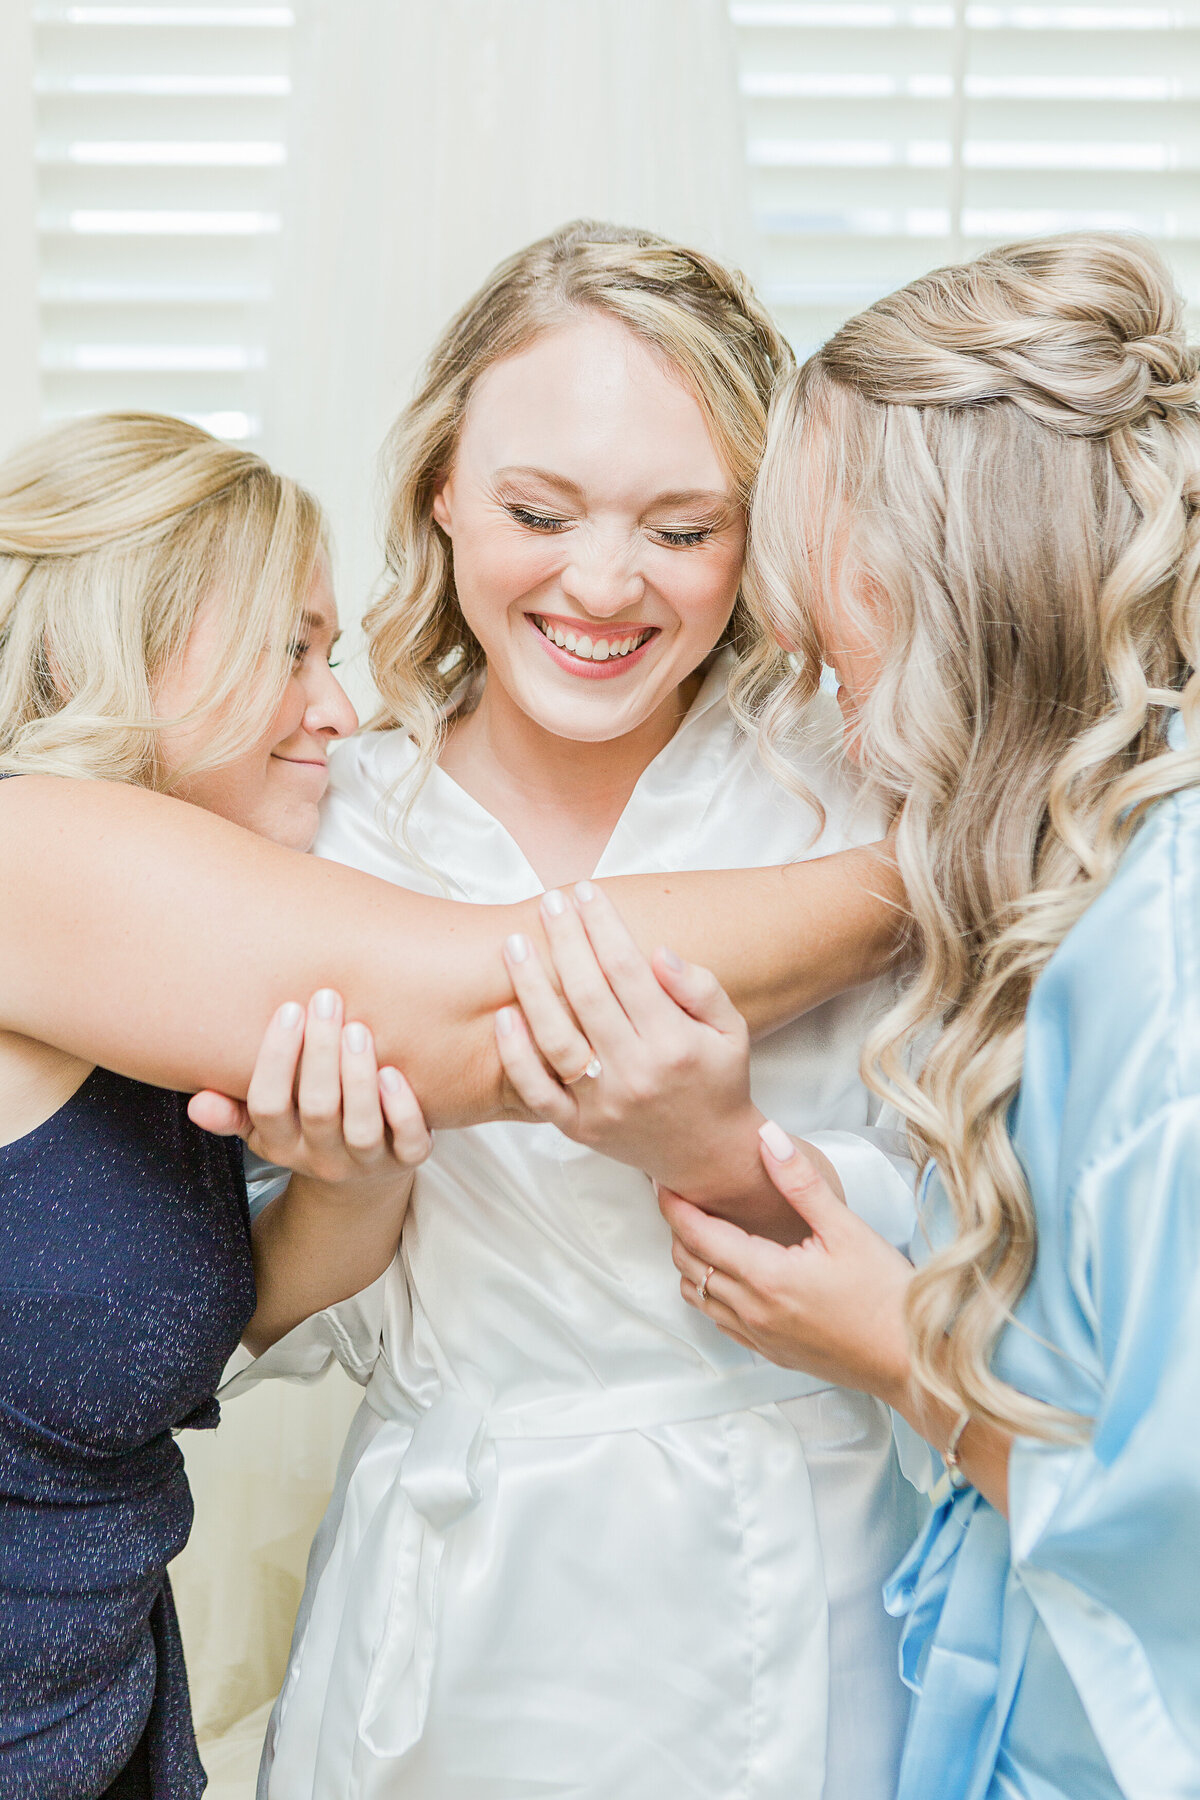 Bride getting ready at the Madison Beach Hotel. Bride is smiling as she is hugged by her mother and sister. Captured by best New England wedding photographer Lia Rose Weddings.